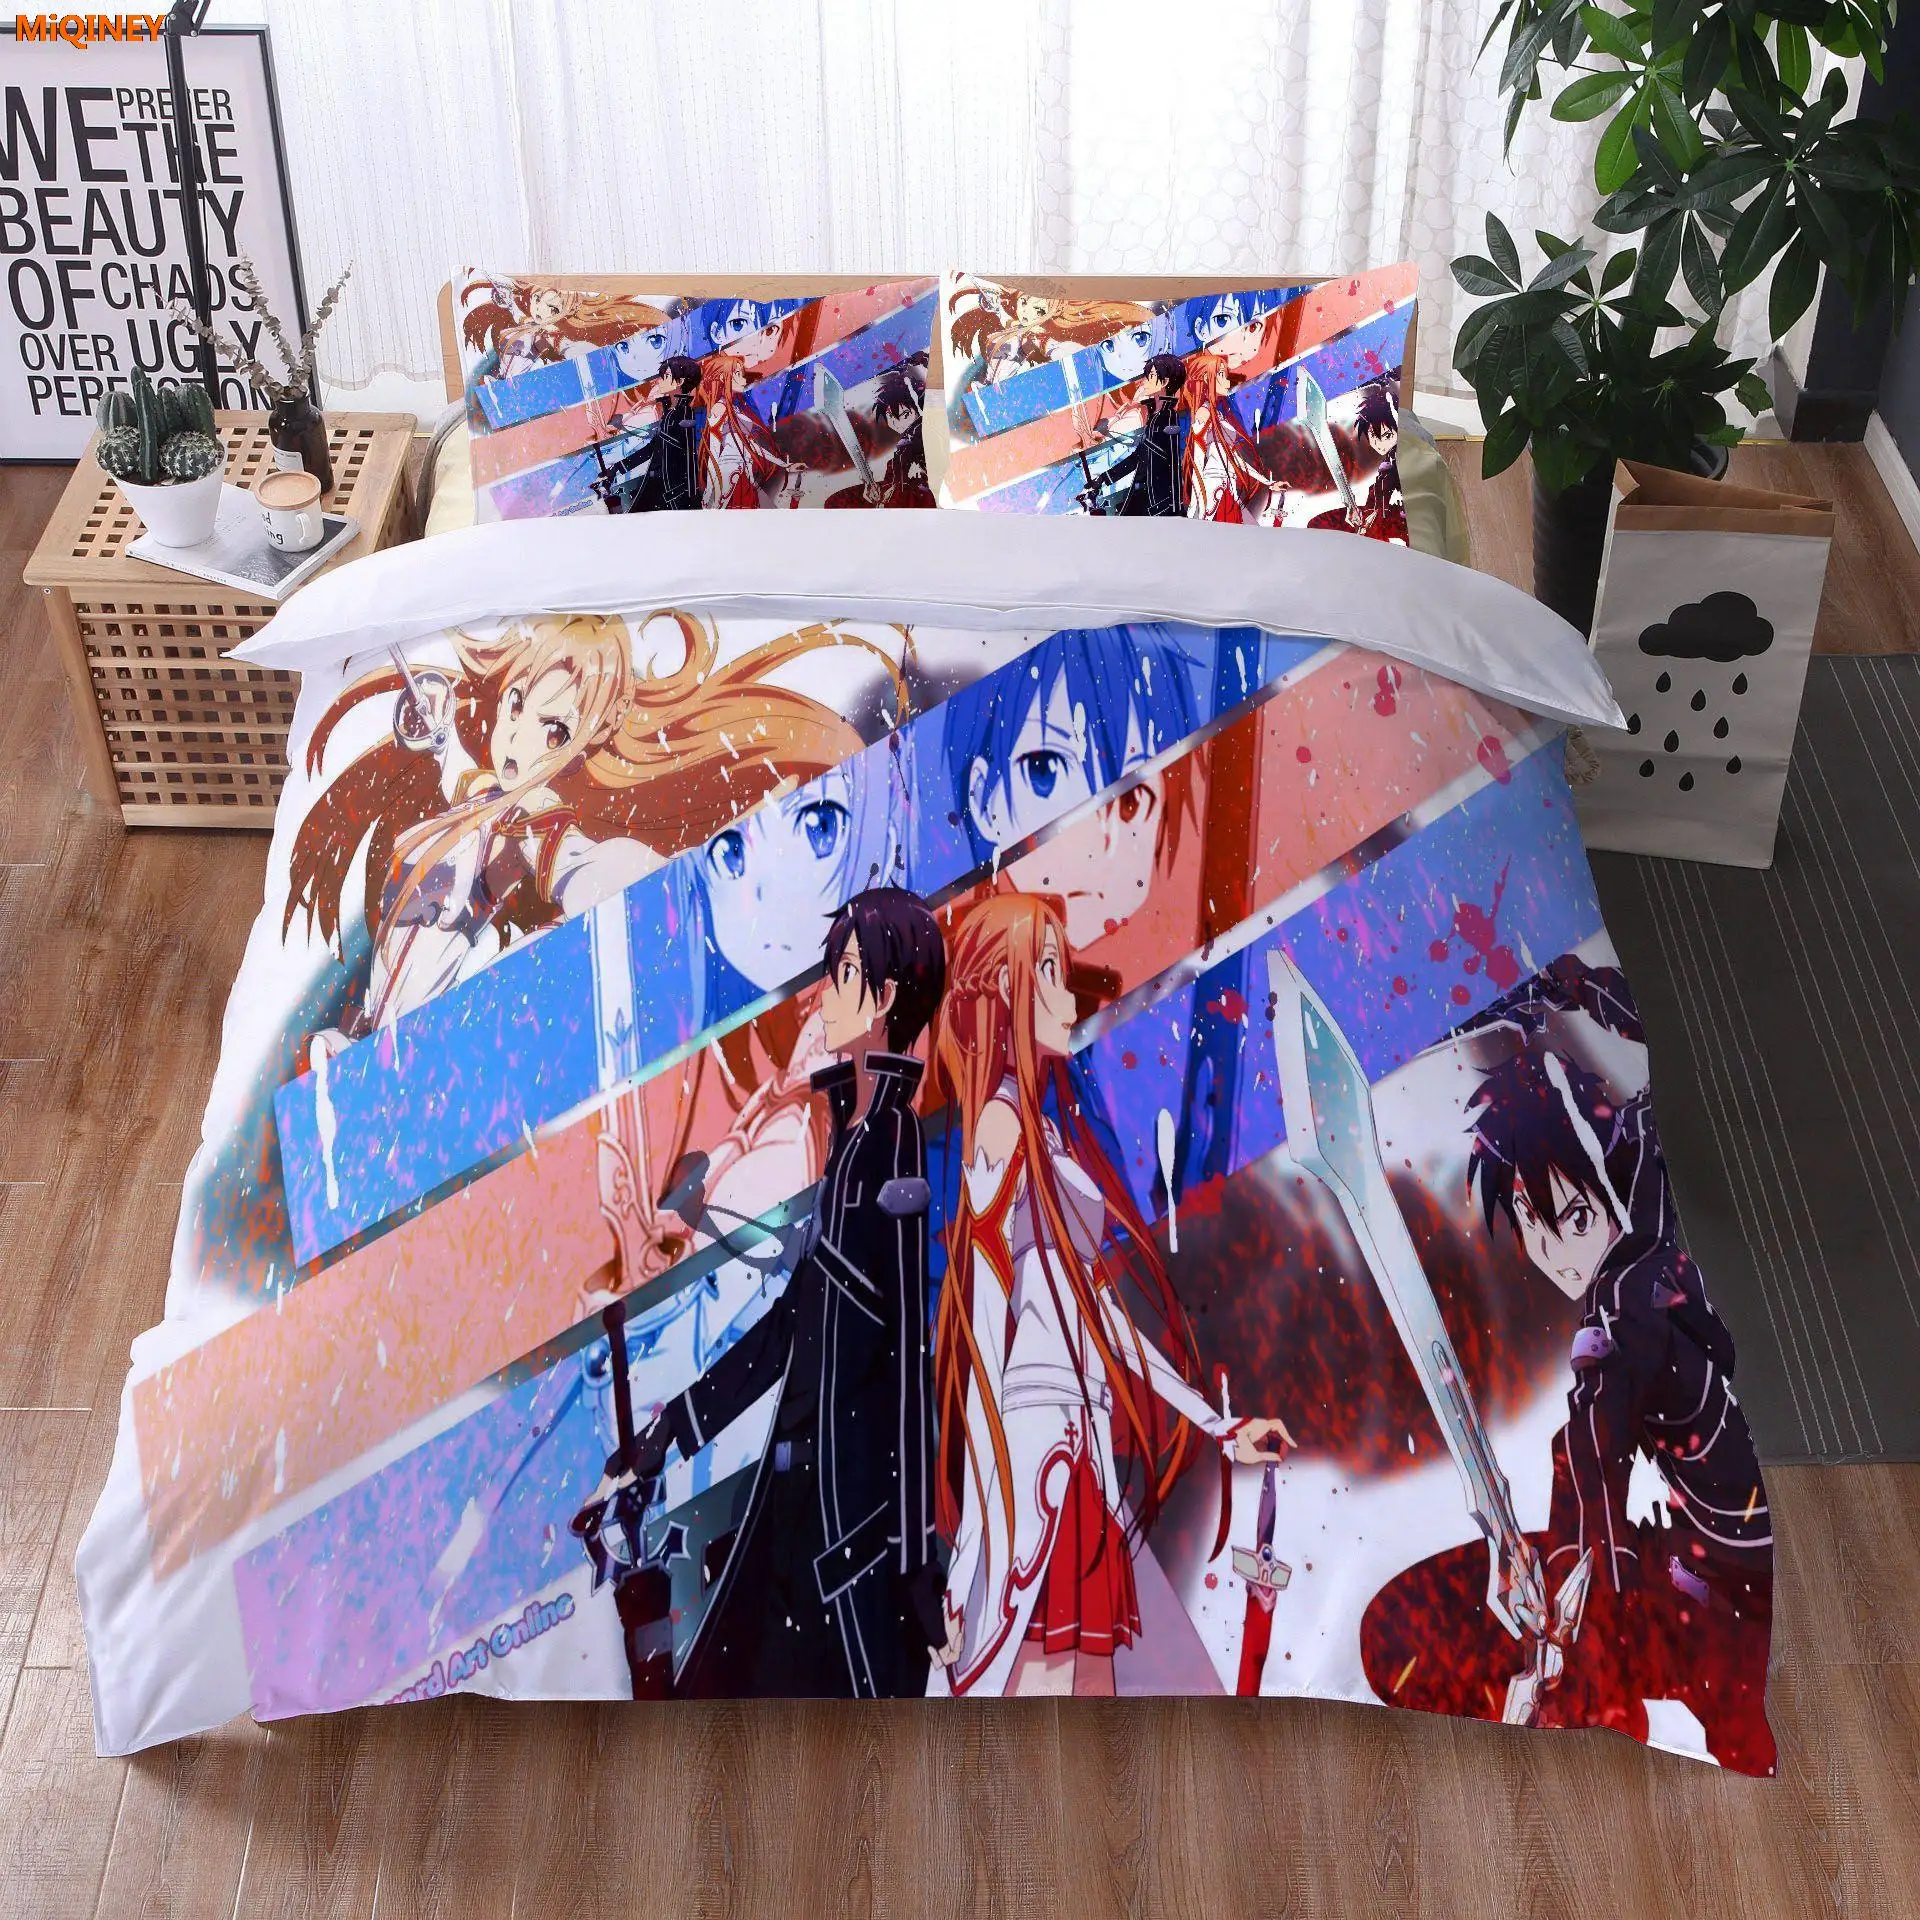 

MiQINEY Sword Art Online 3D Pattern Duvet Cover Sets Bedding Sets Single Double Twin Full Queen King for Bedroom Decors